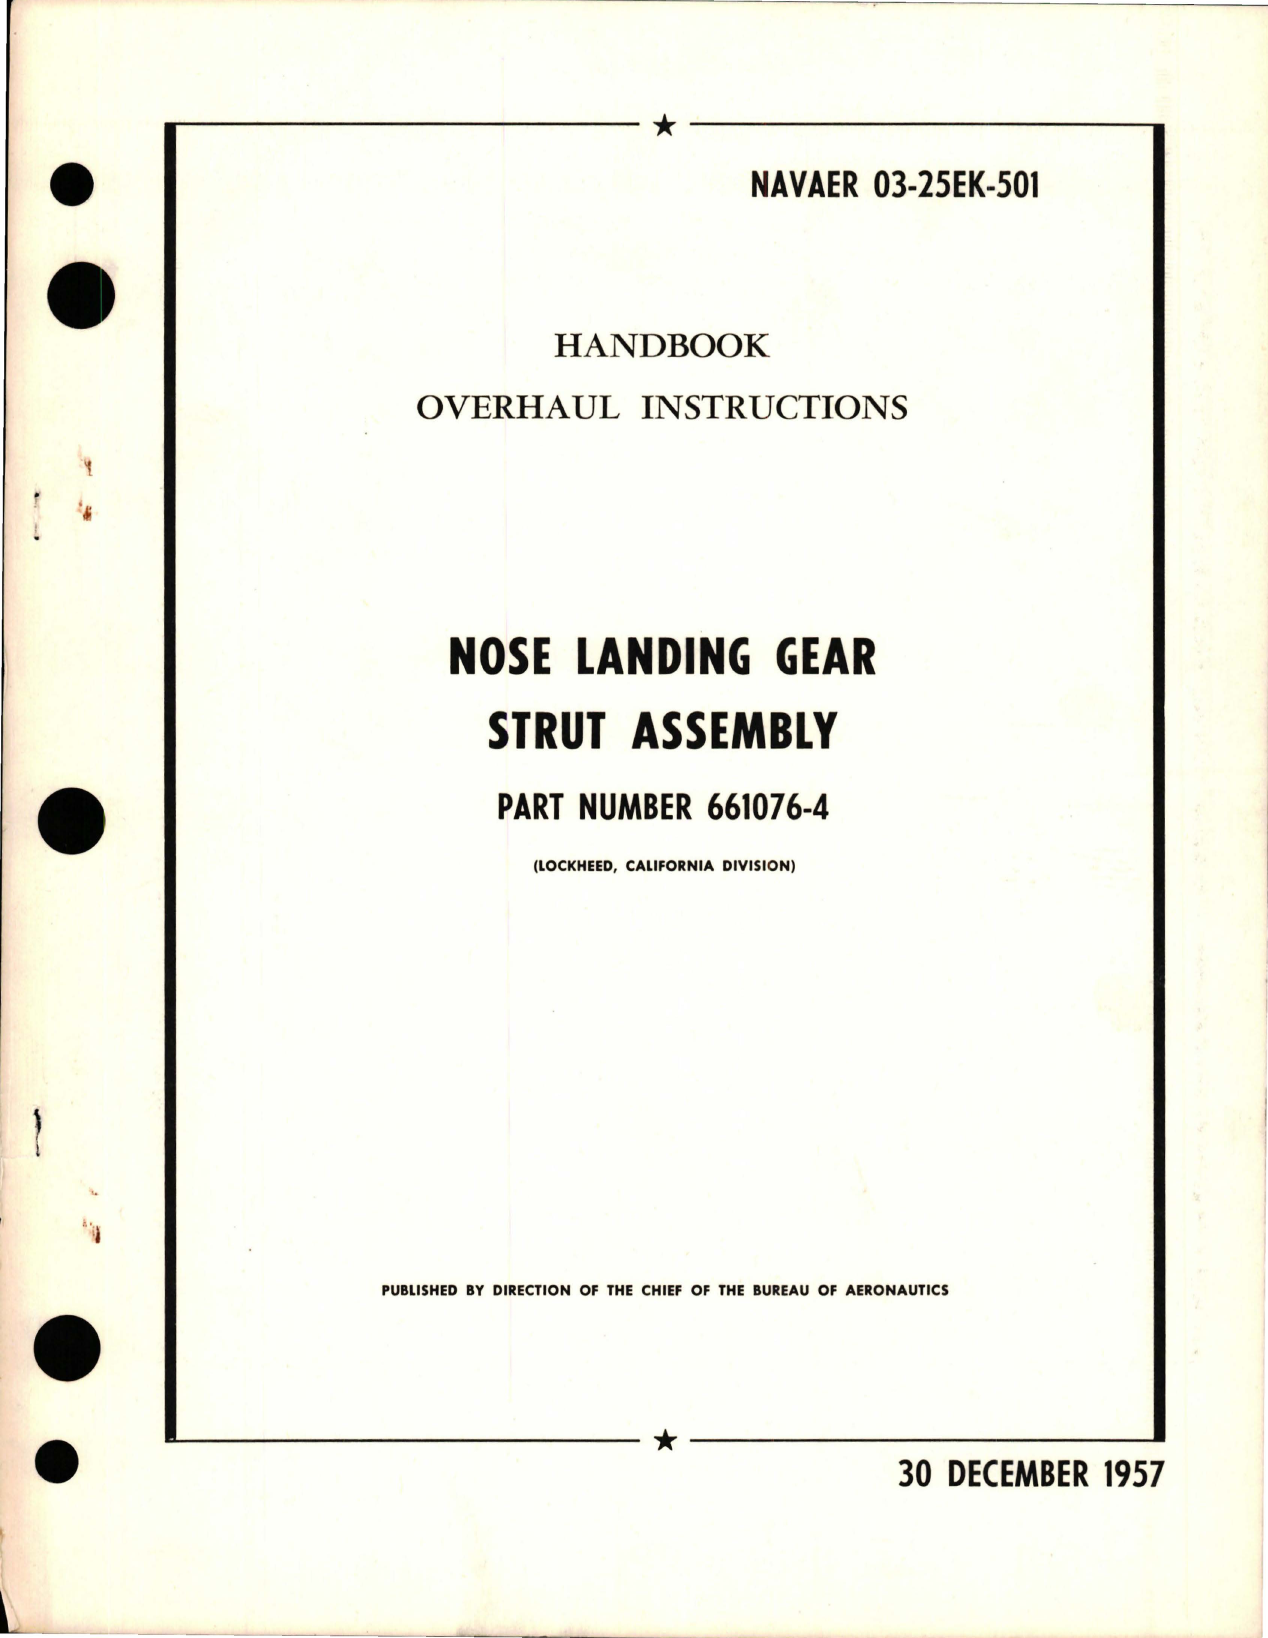 Sample page 1 from AirCorps Library document: Overhaul Instructions for Nose Landing Gear Strut Assembly - Part 661076-4